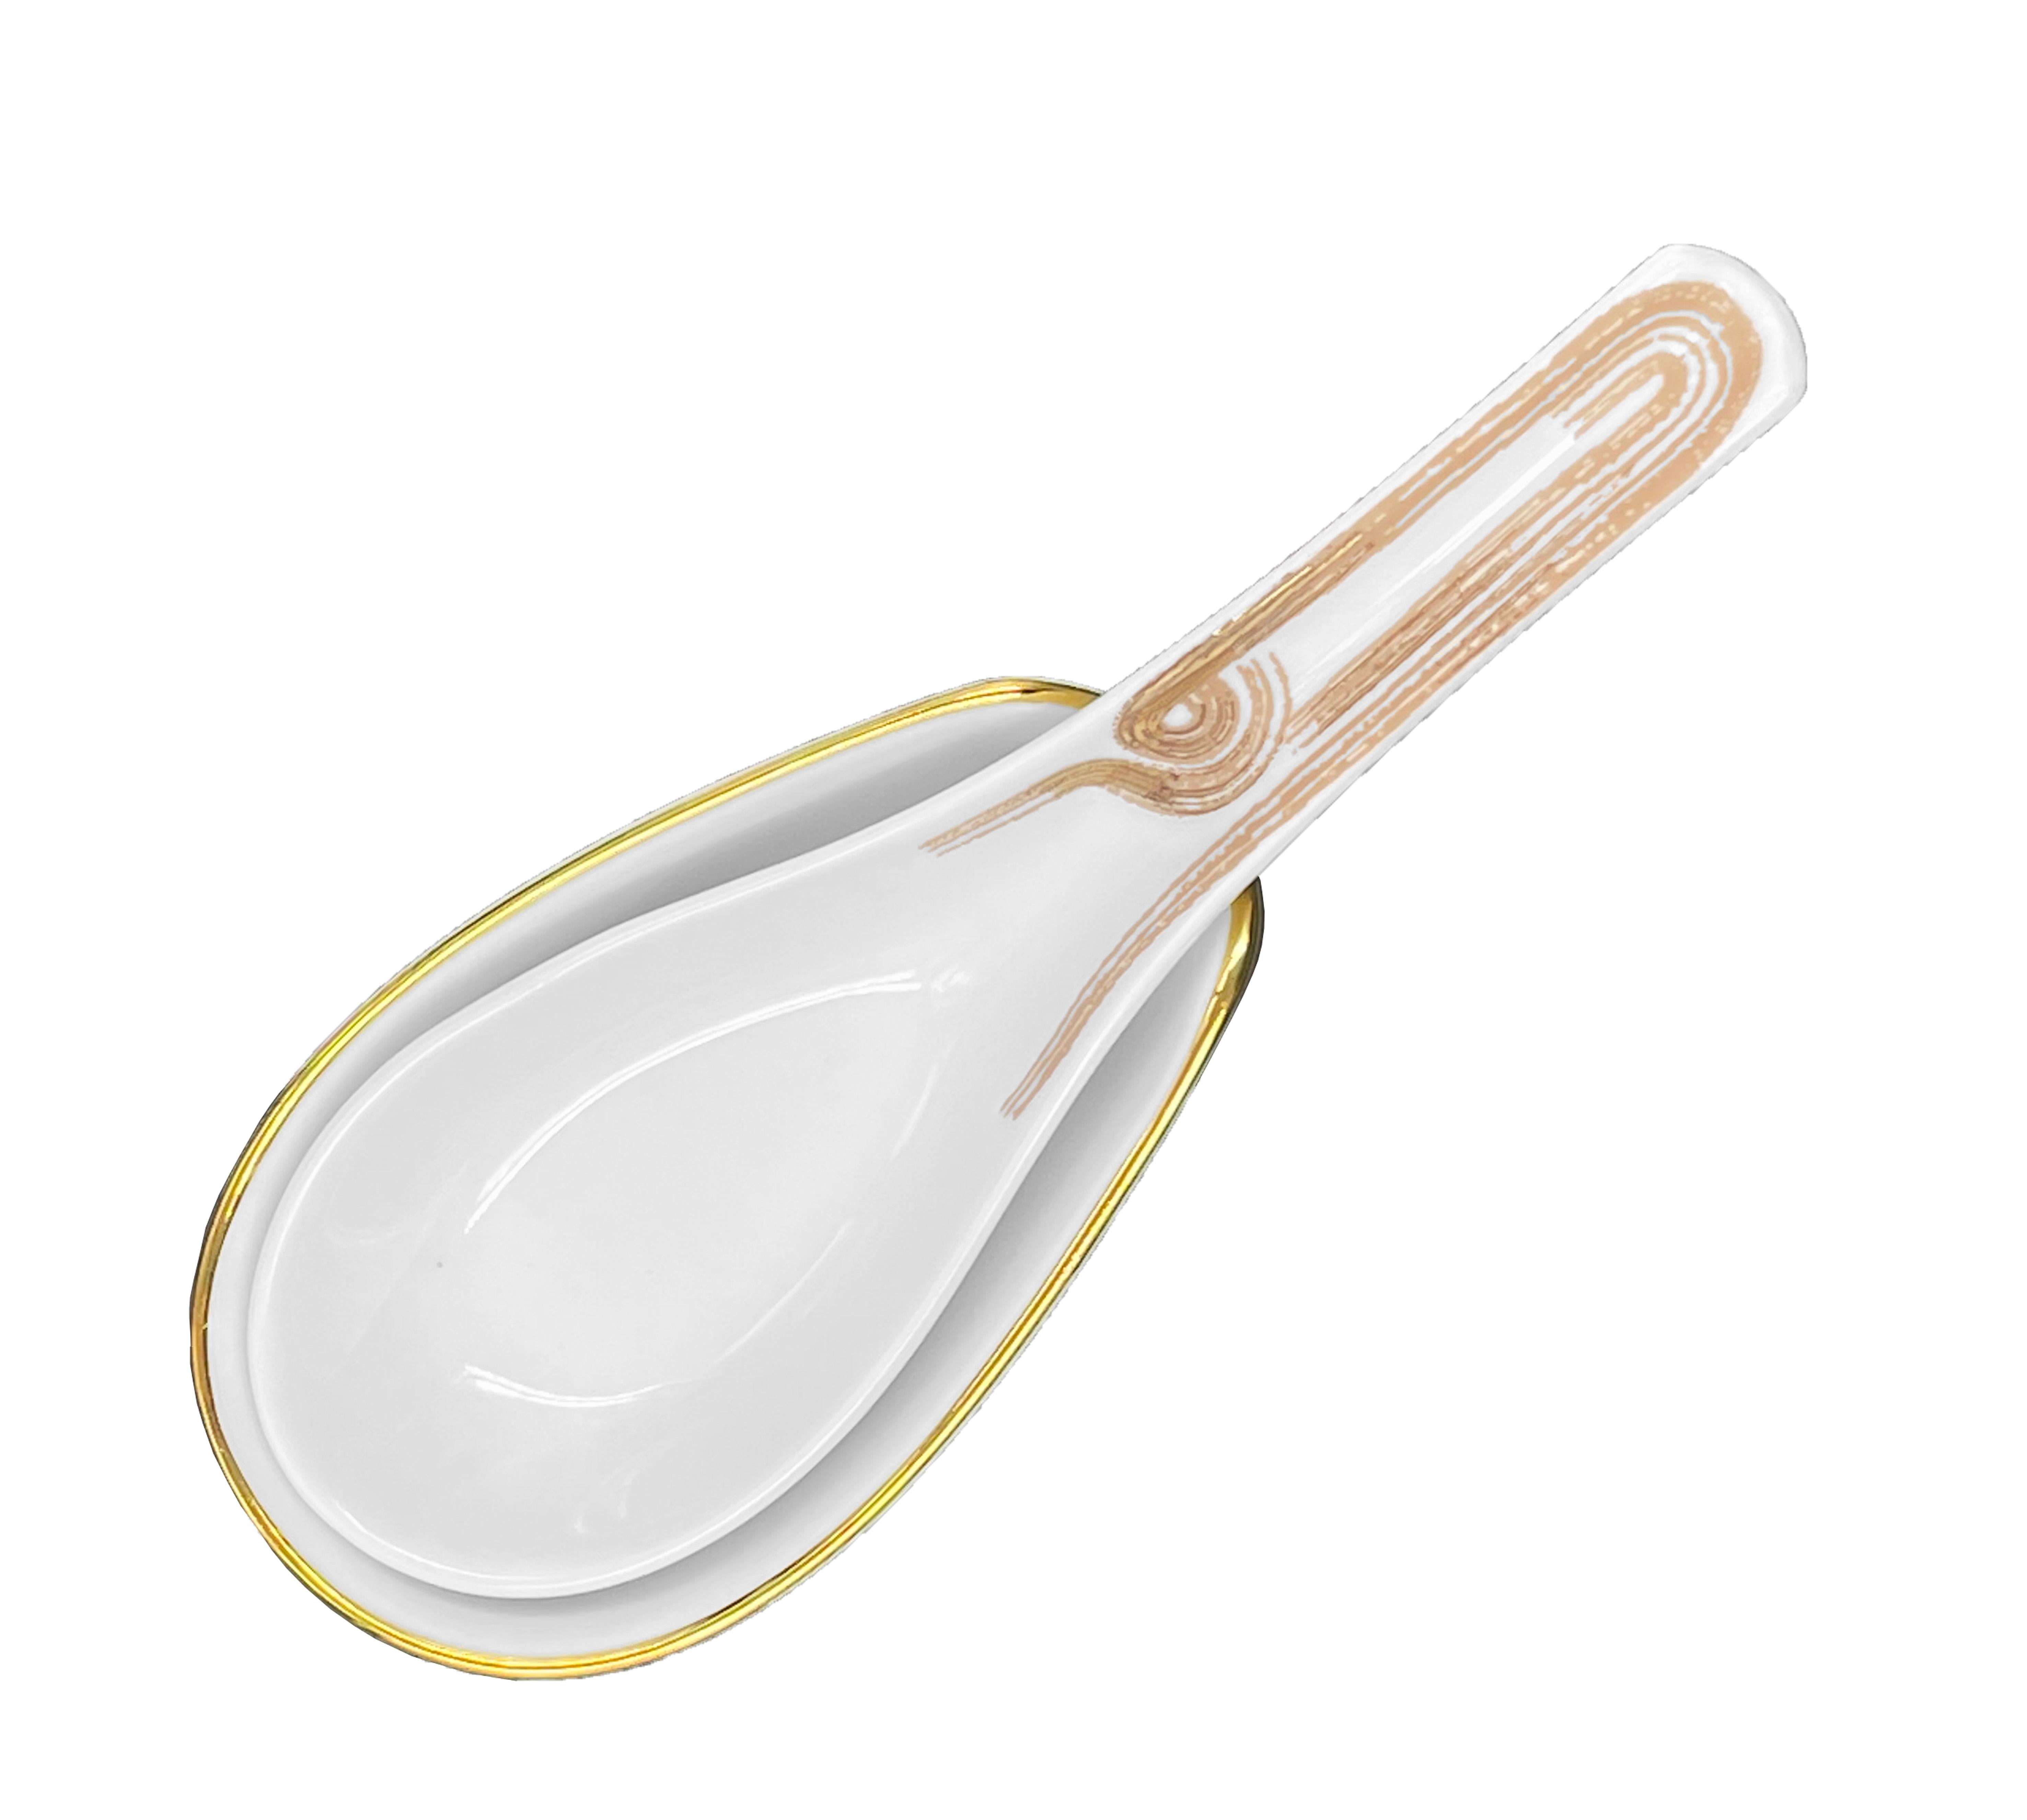 Description: Spoon with spoon holder set (2 pieces)
Color: Beige gold
Spoon Size: 13.5 Ø x 4.5 H cm
Spoon Holder Size: 9 x 5.5 x 2 H cm
Material: Porcelain and gold
Collection: Art Déco Garden

Larger quantities available upon request, with 8